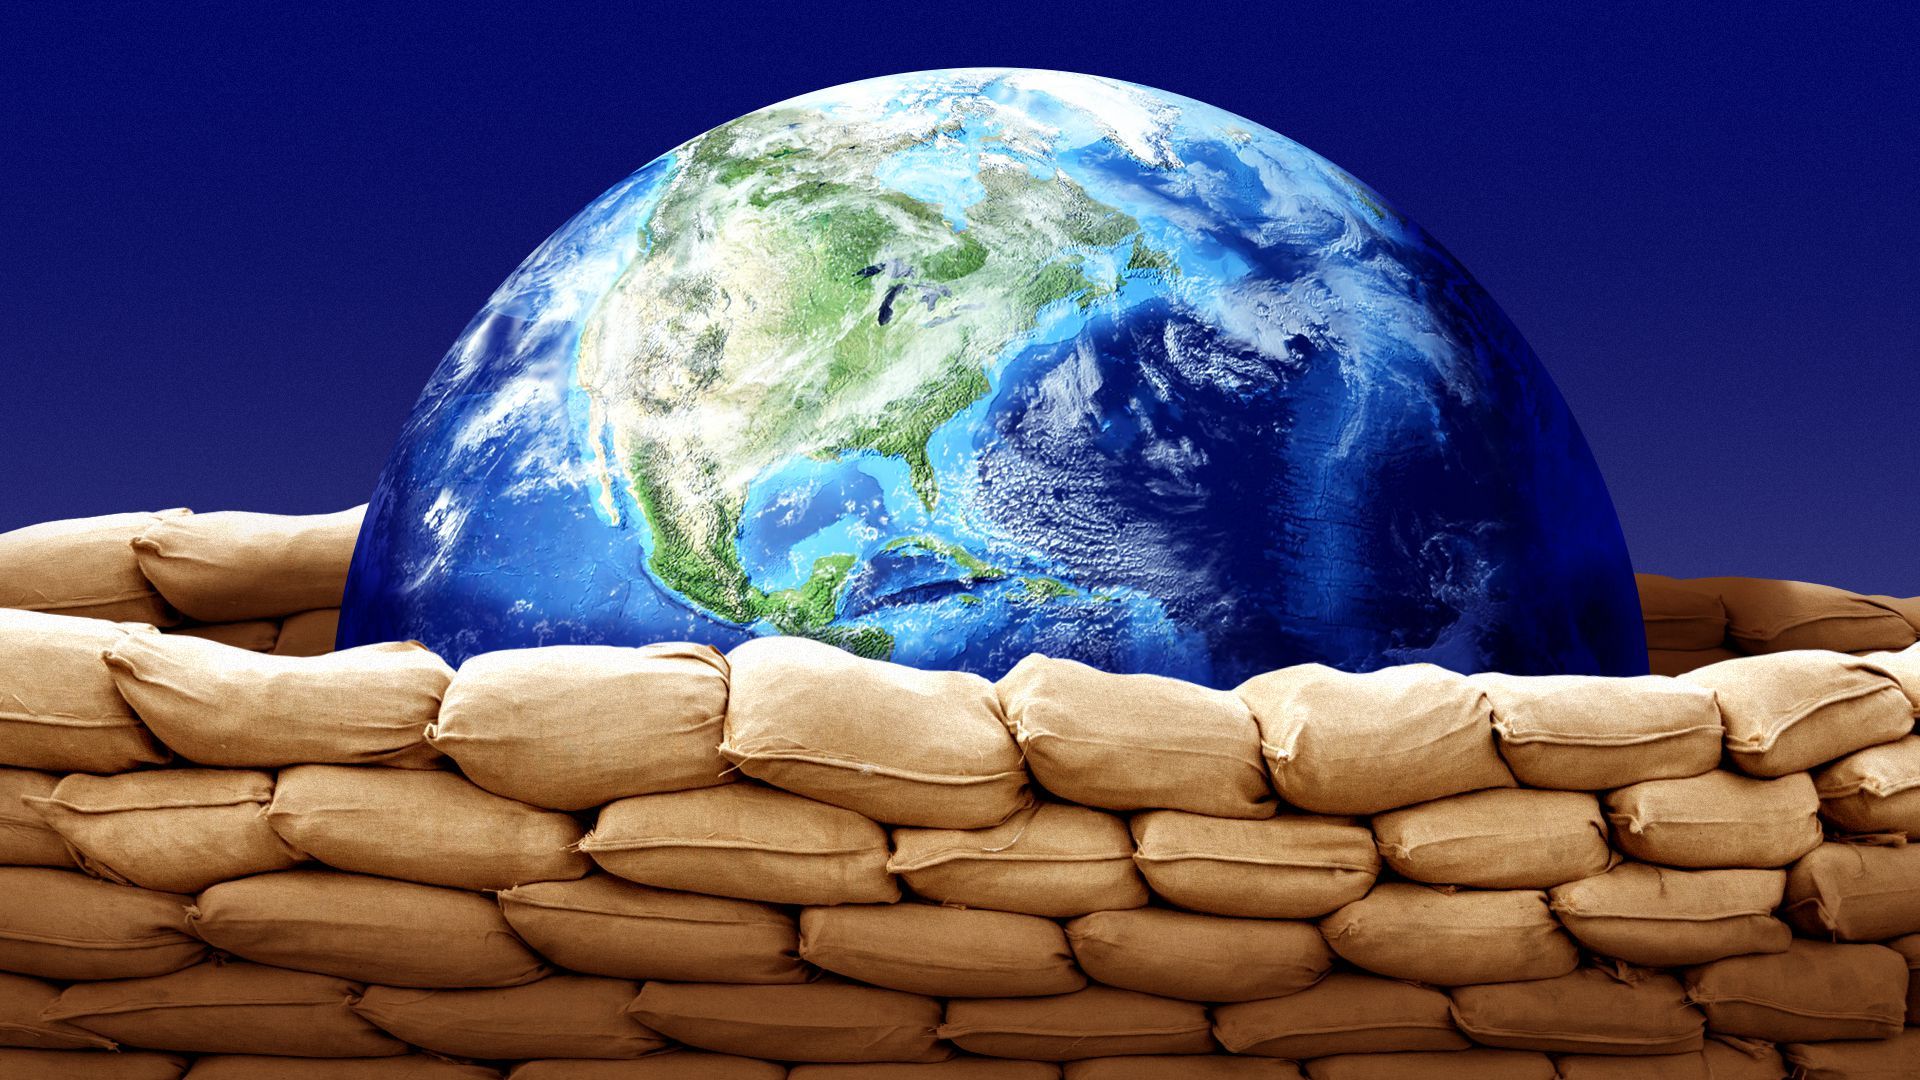 Illustration of the earth surrounded by sandbags 